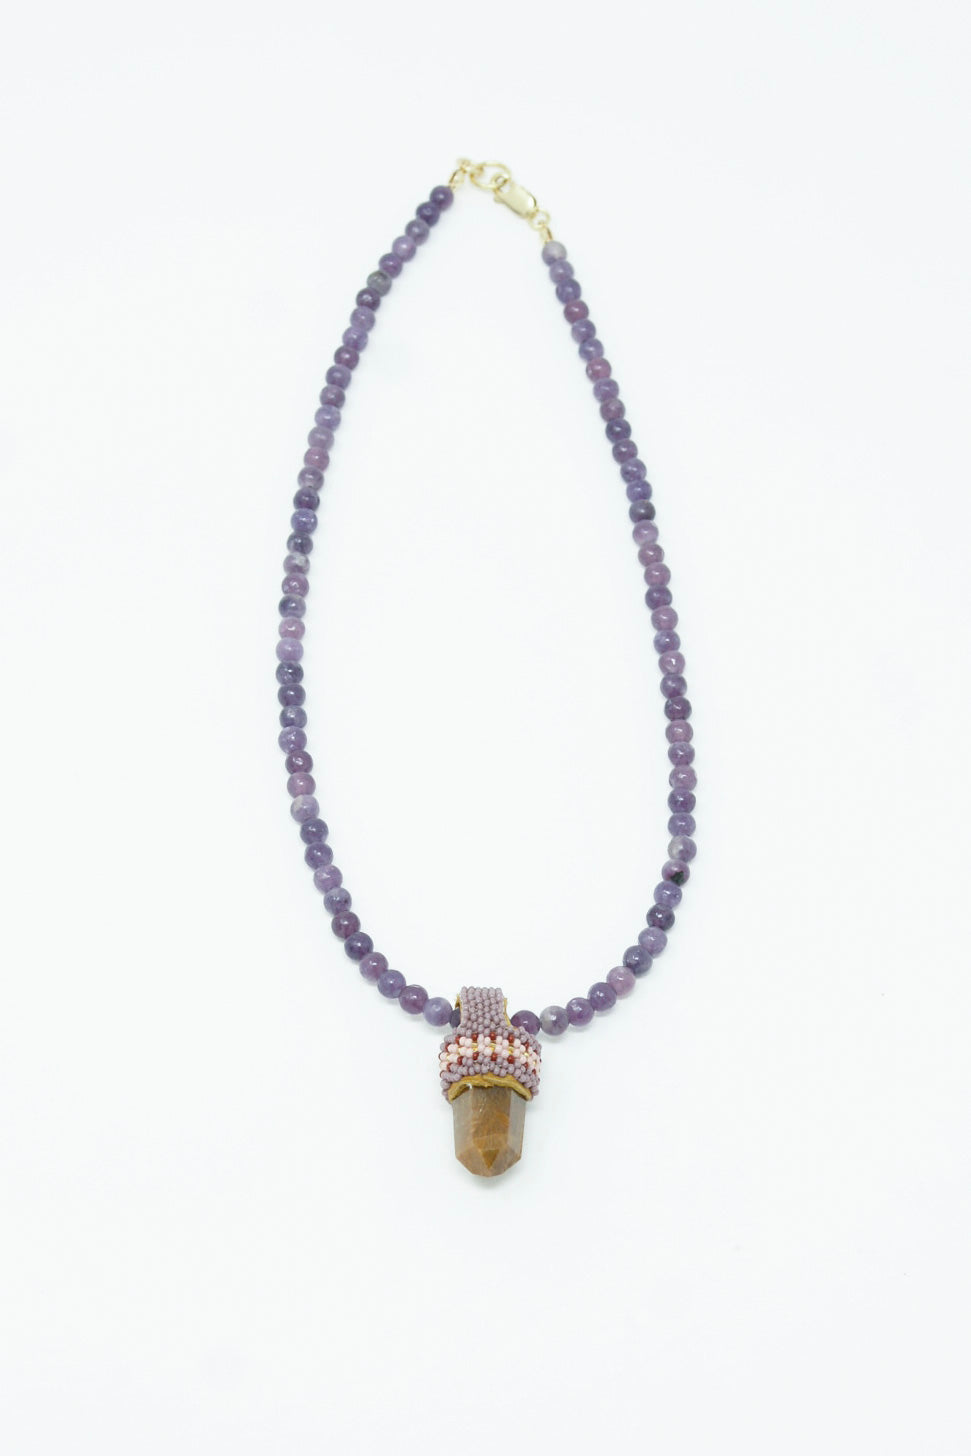 A Pendulum Necklace in Lepidolite Purple Beads, Rutilated Quartz Crystal pendant by Robin Mollicone.